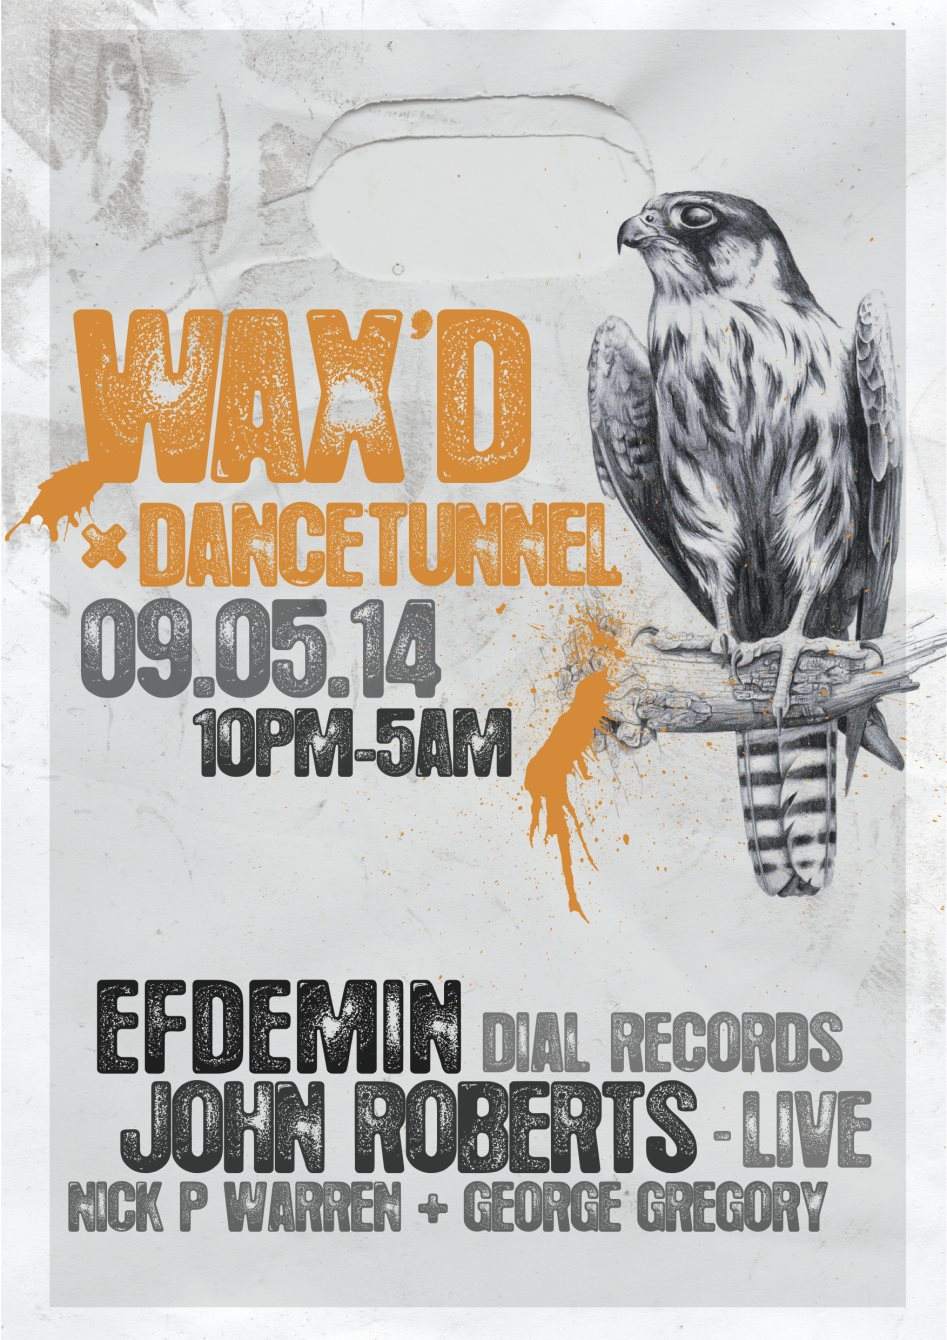 Wax'd x Dance Tunnel with Efdemin and John Roberts - フライヤー表